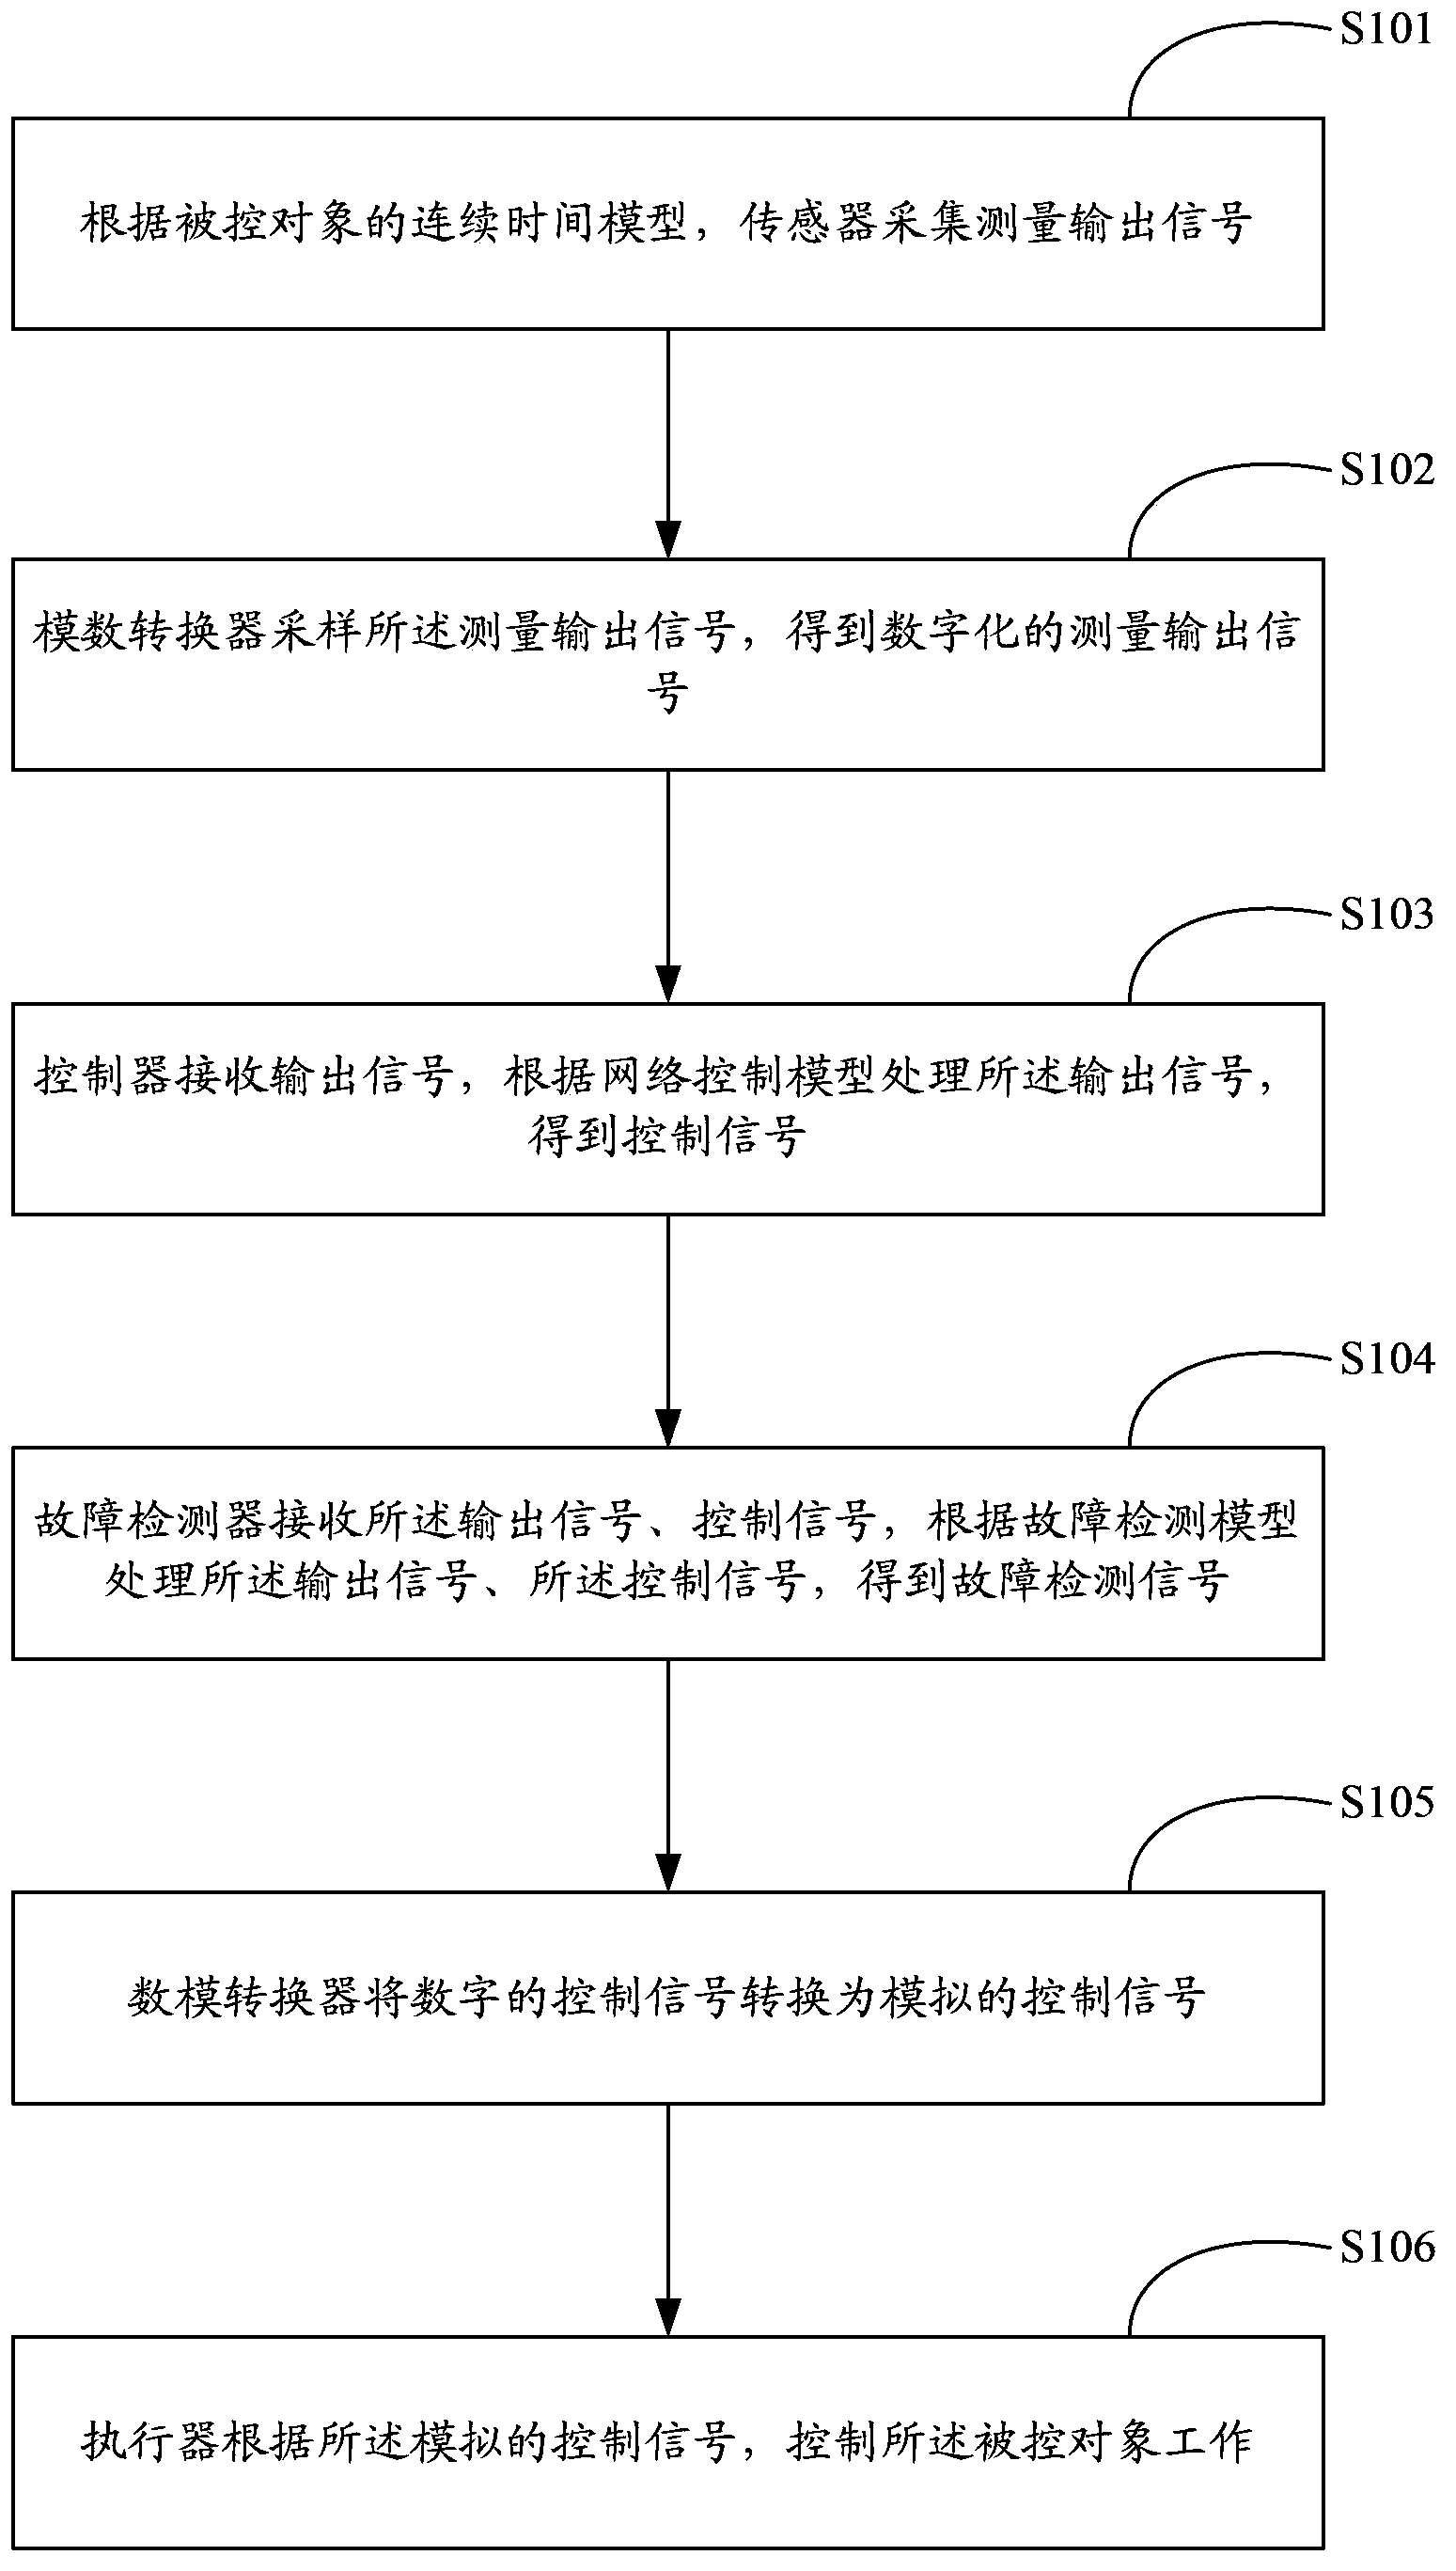 Method and system for detecting and controlling network control system